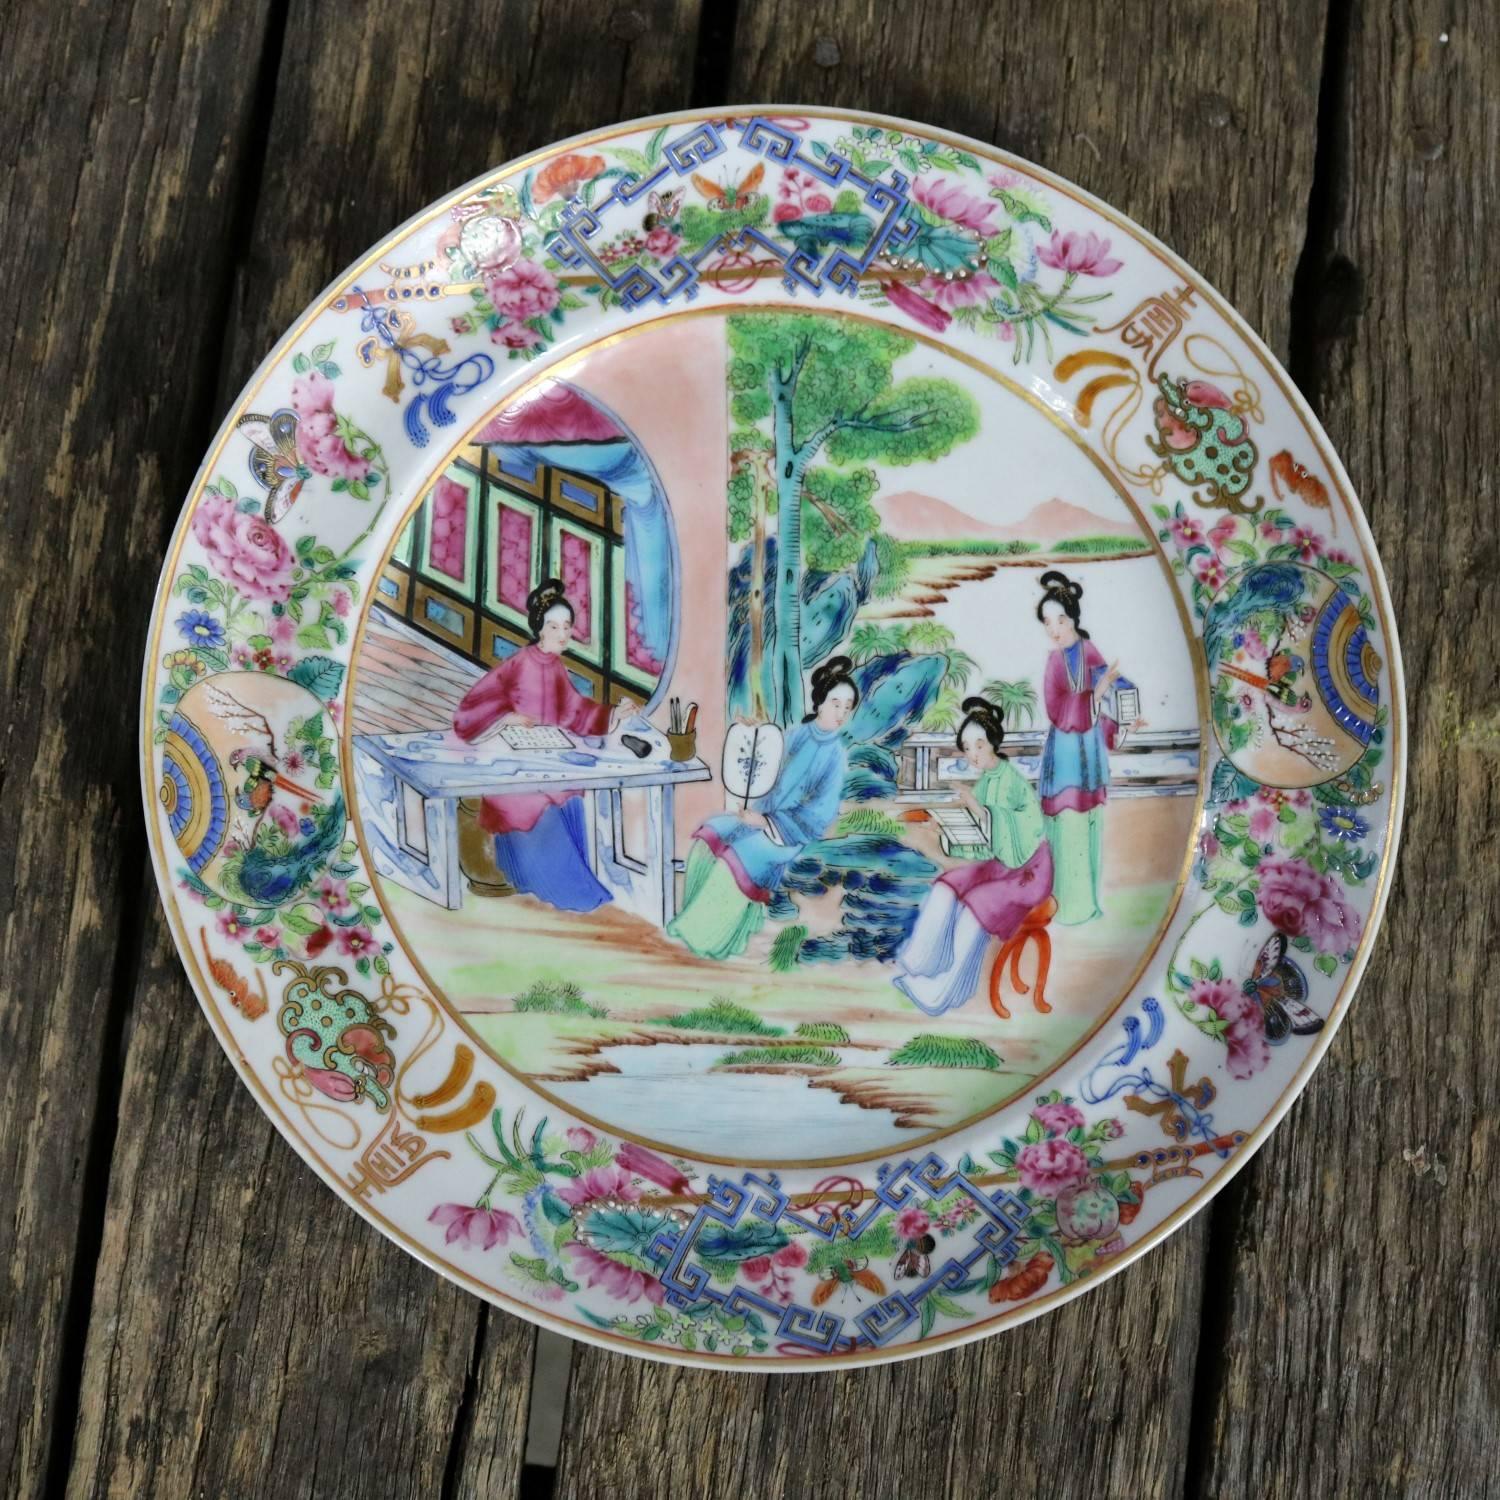 Wonderful Qing dynasty Chinese porcelain ten-inch rose medallion plate. It is in fabulous vintage condition with no chips, cracks, or chiggers, circa 1870.

This is an absolutely beautiful example of Qing dynasty Chinese porcelain. It has a